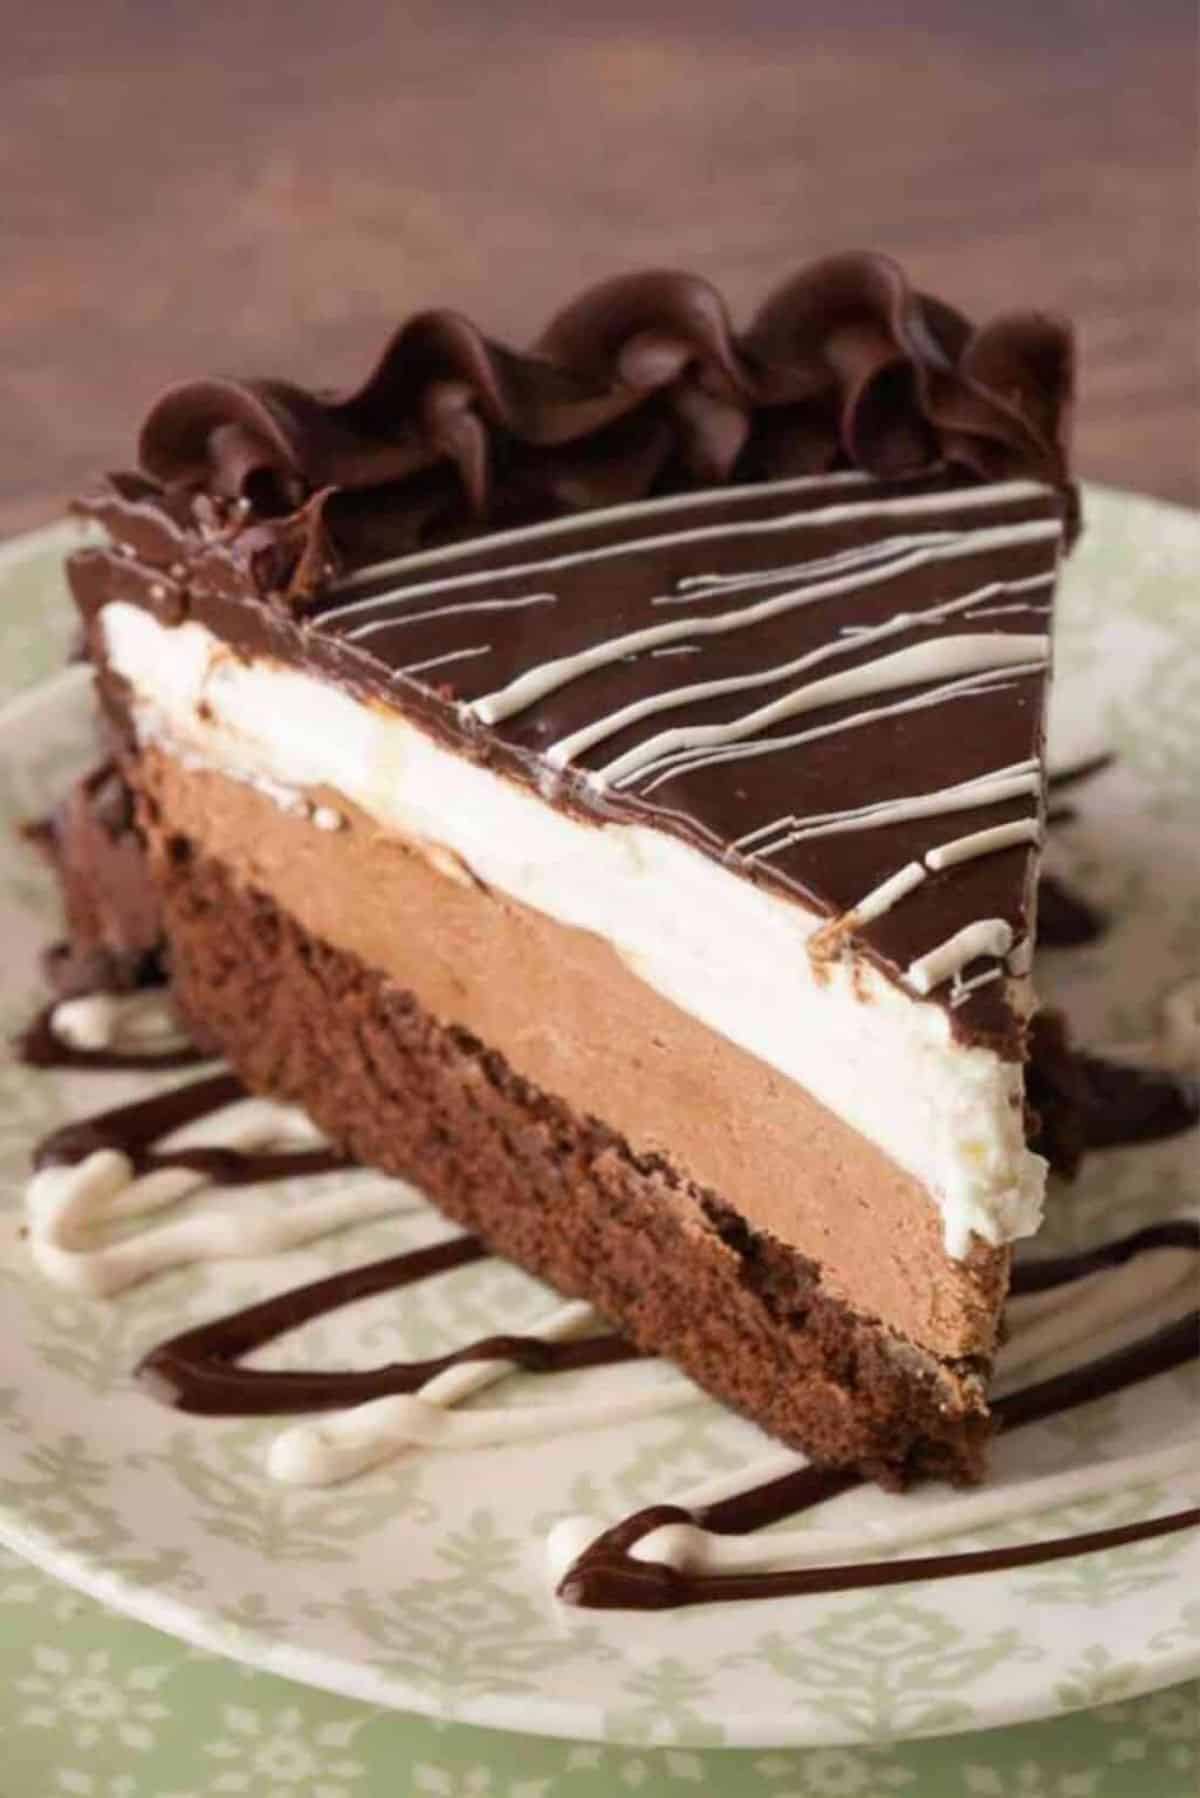 A piece of delicious Black Tie Mousse Cake on a plate.